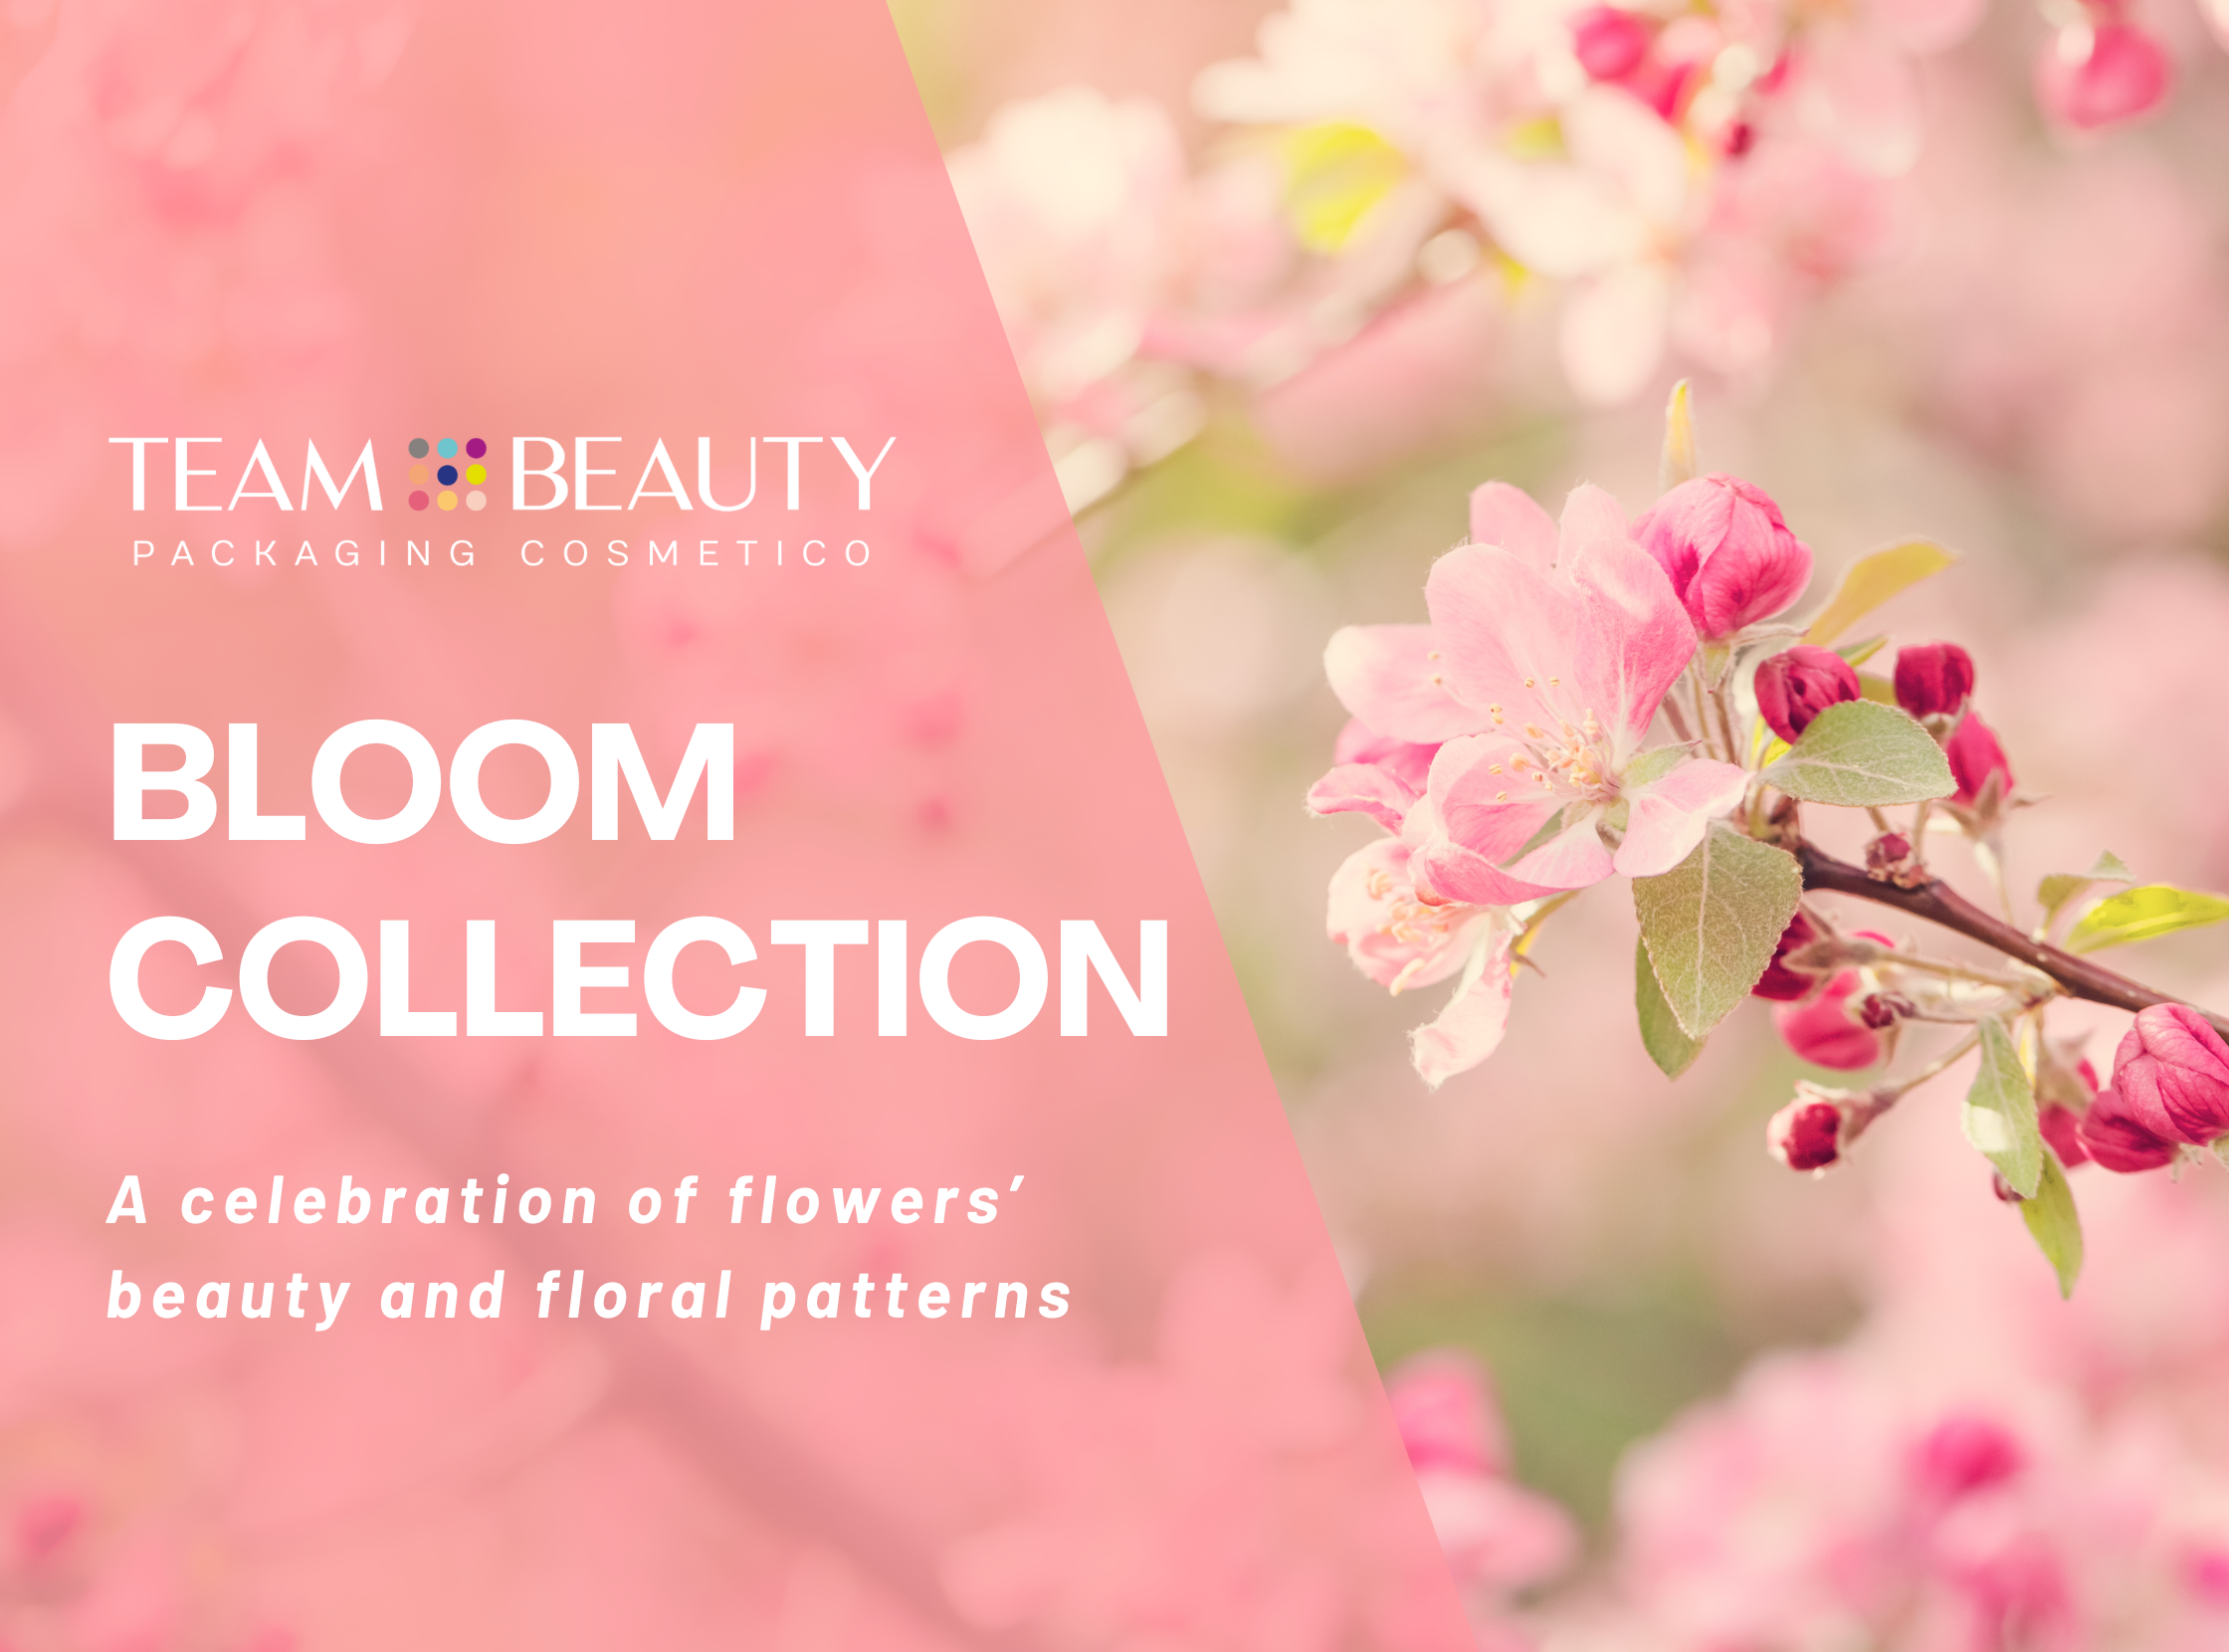 The floral charm of Bloom Collection